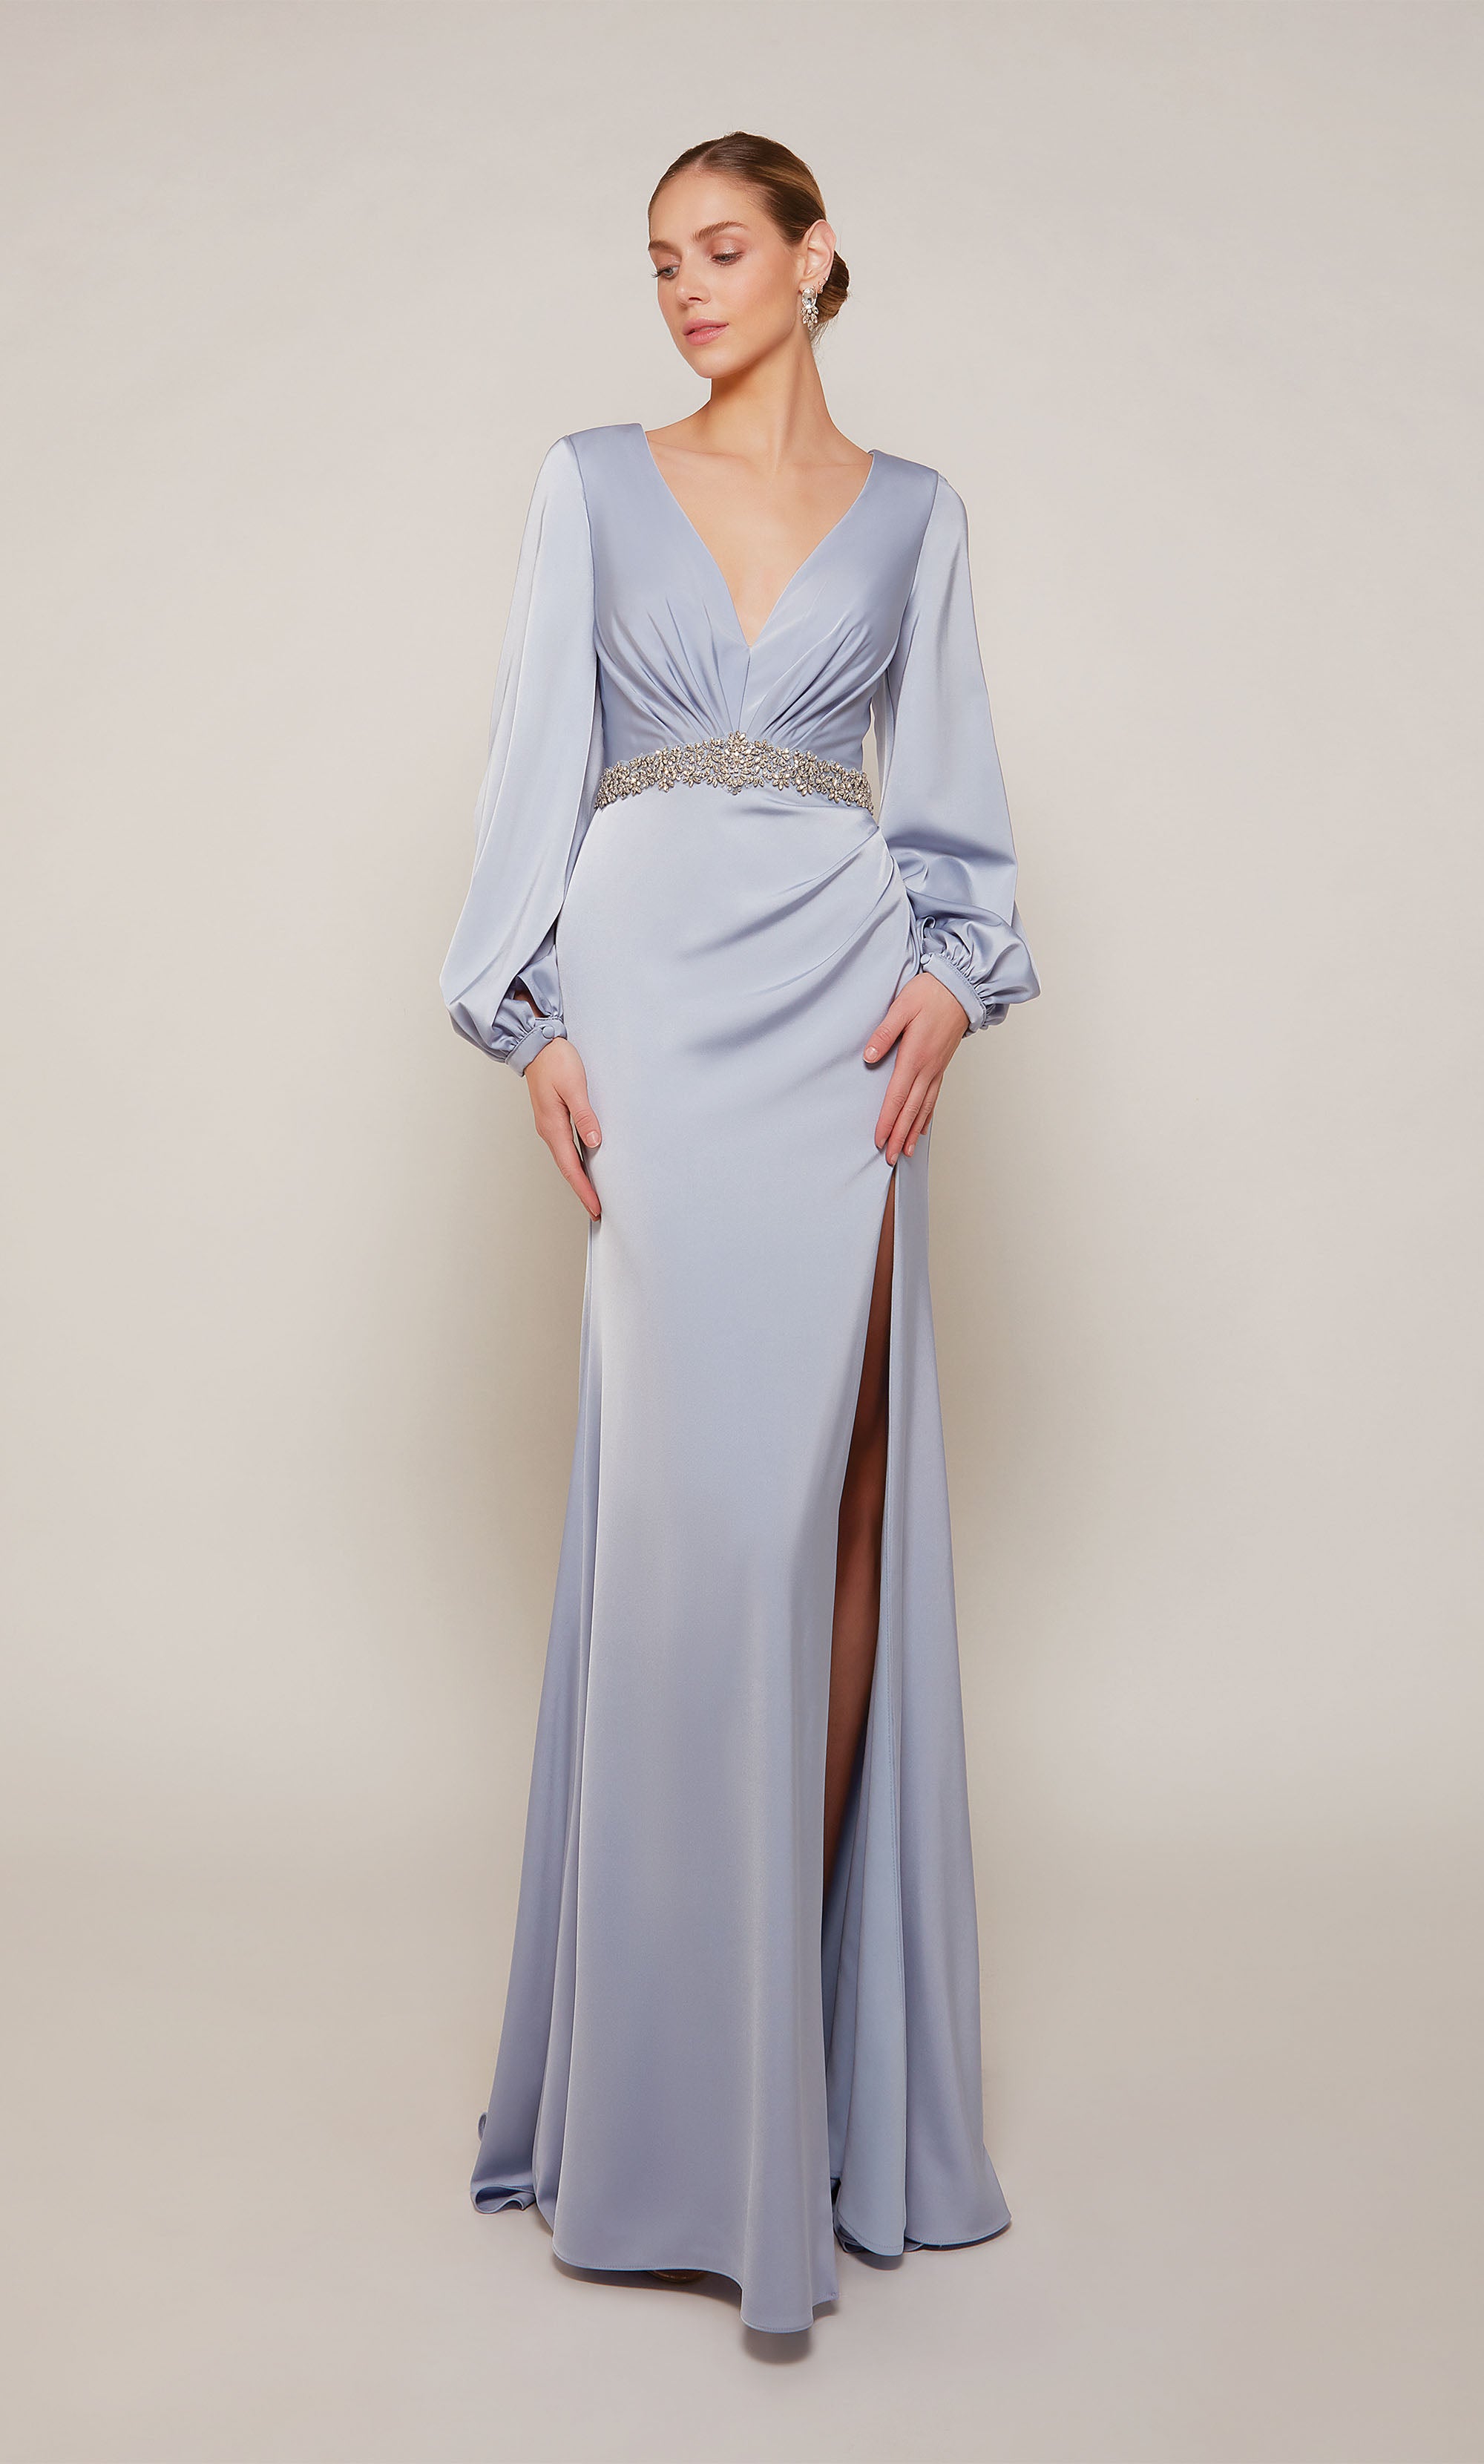 Light Blue Mother of the Bride Dress with Long Sleeves - Dress for